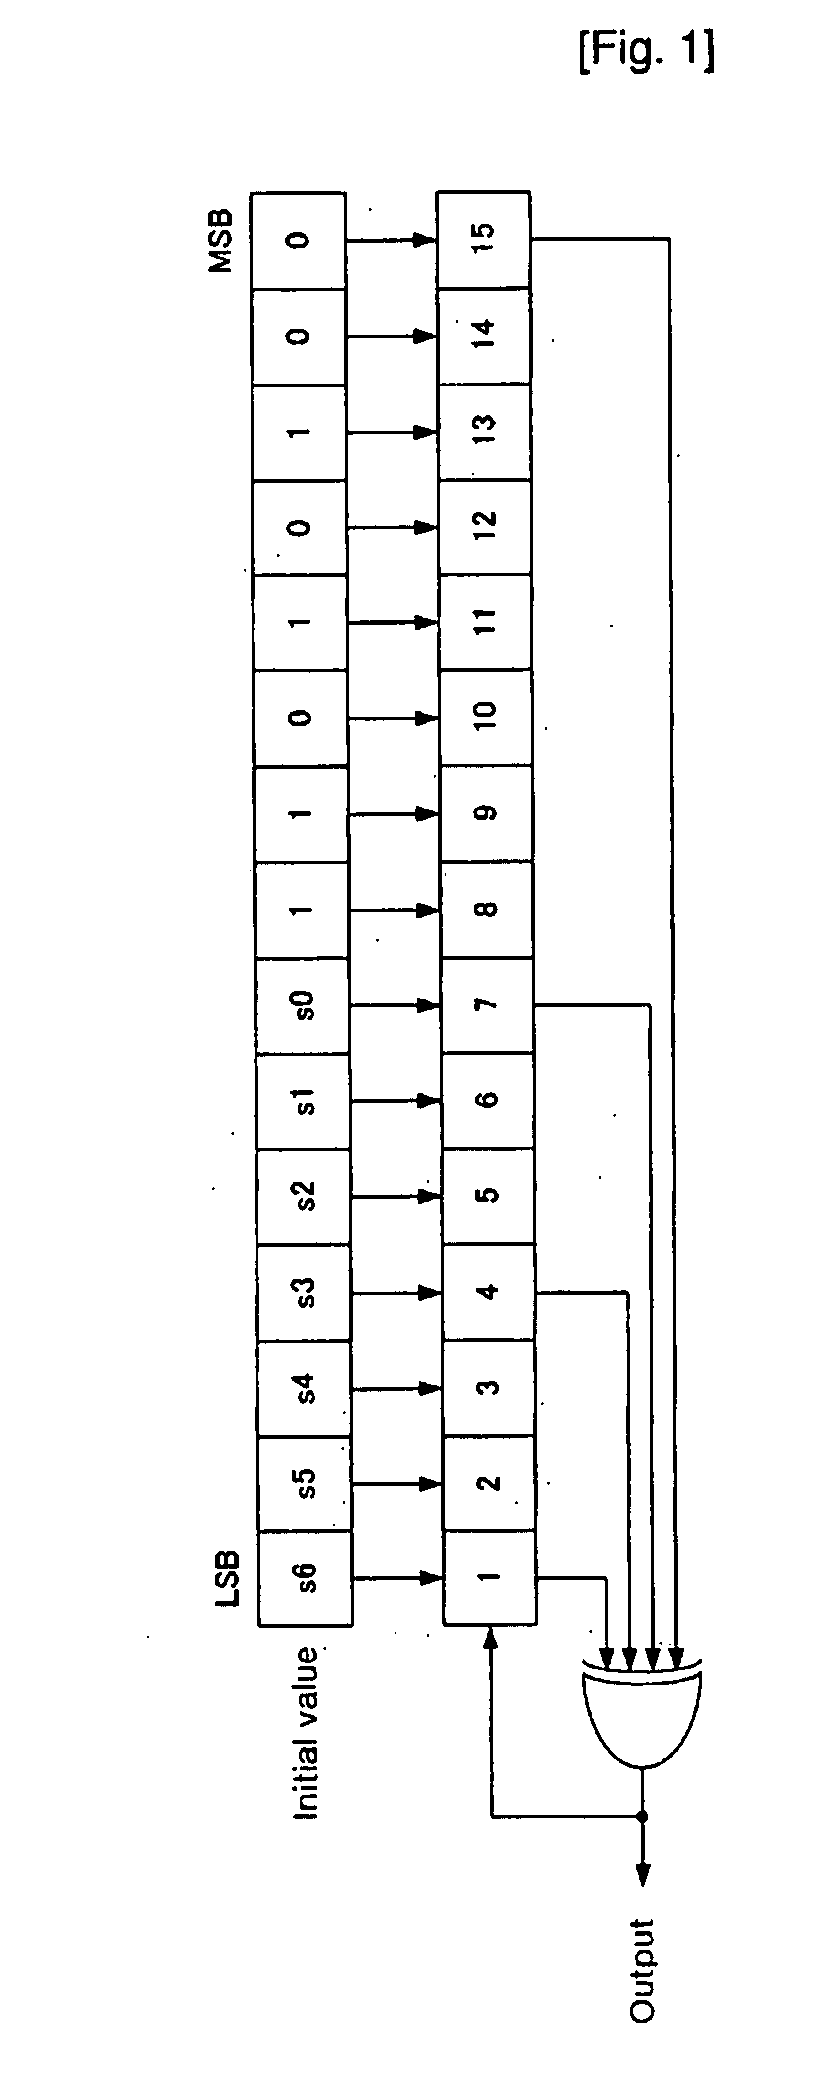 Apparatus and Method for Generating Ranging Pseudo Noise Code